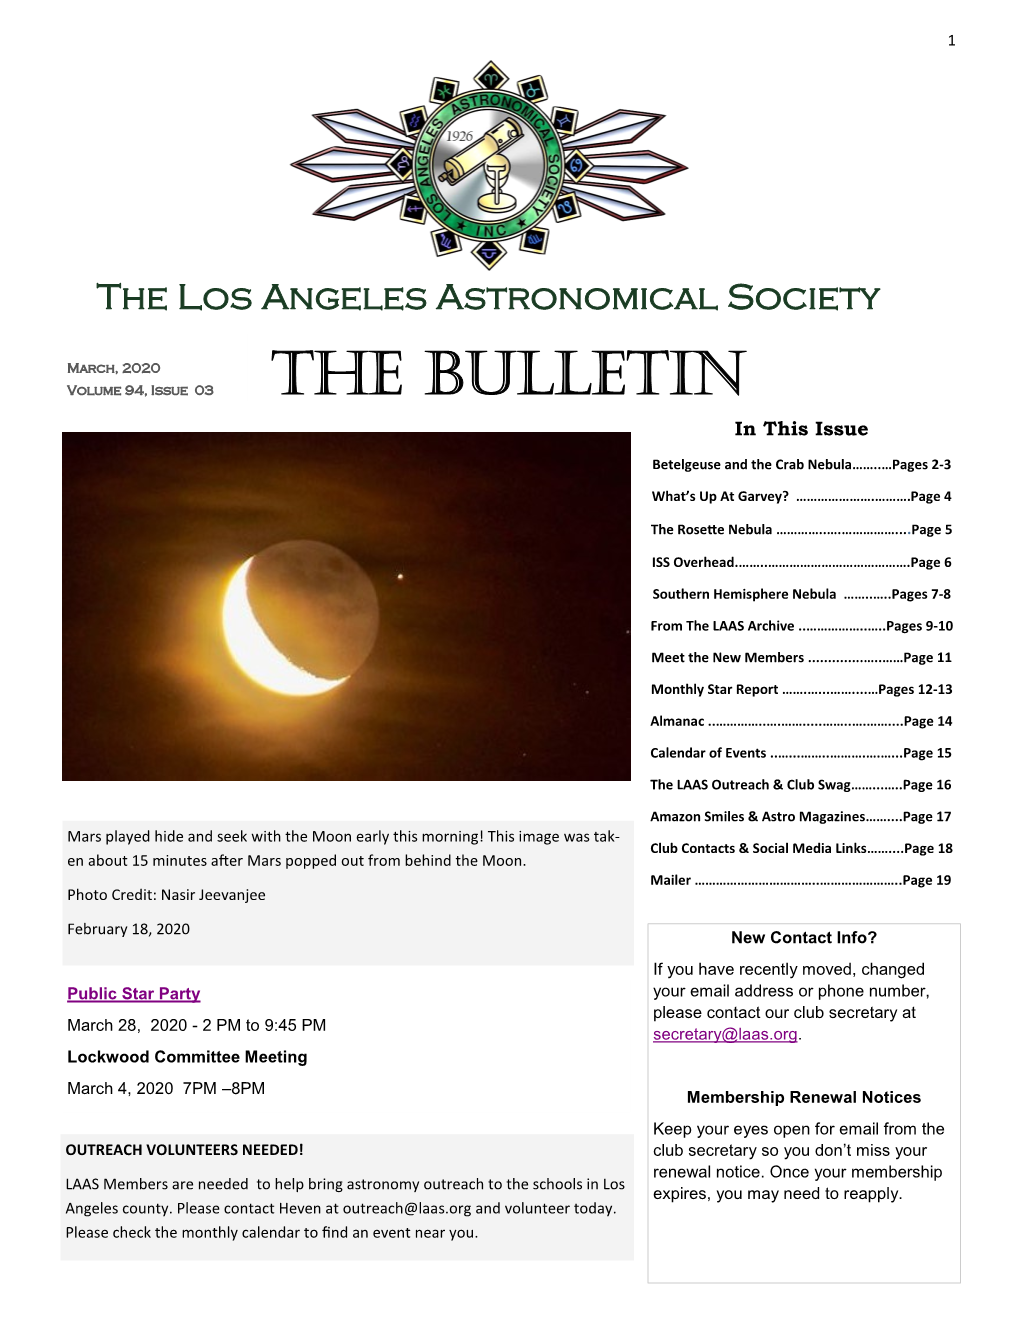 The Bulletin Volume 94, Issue 03